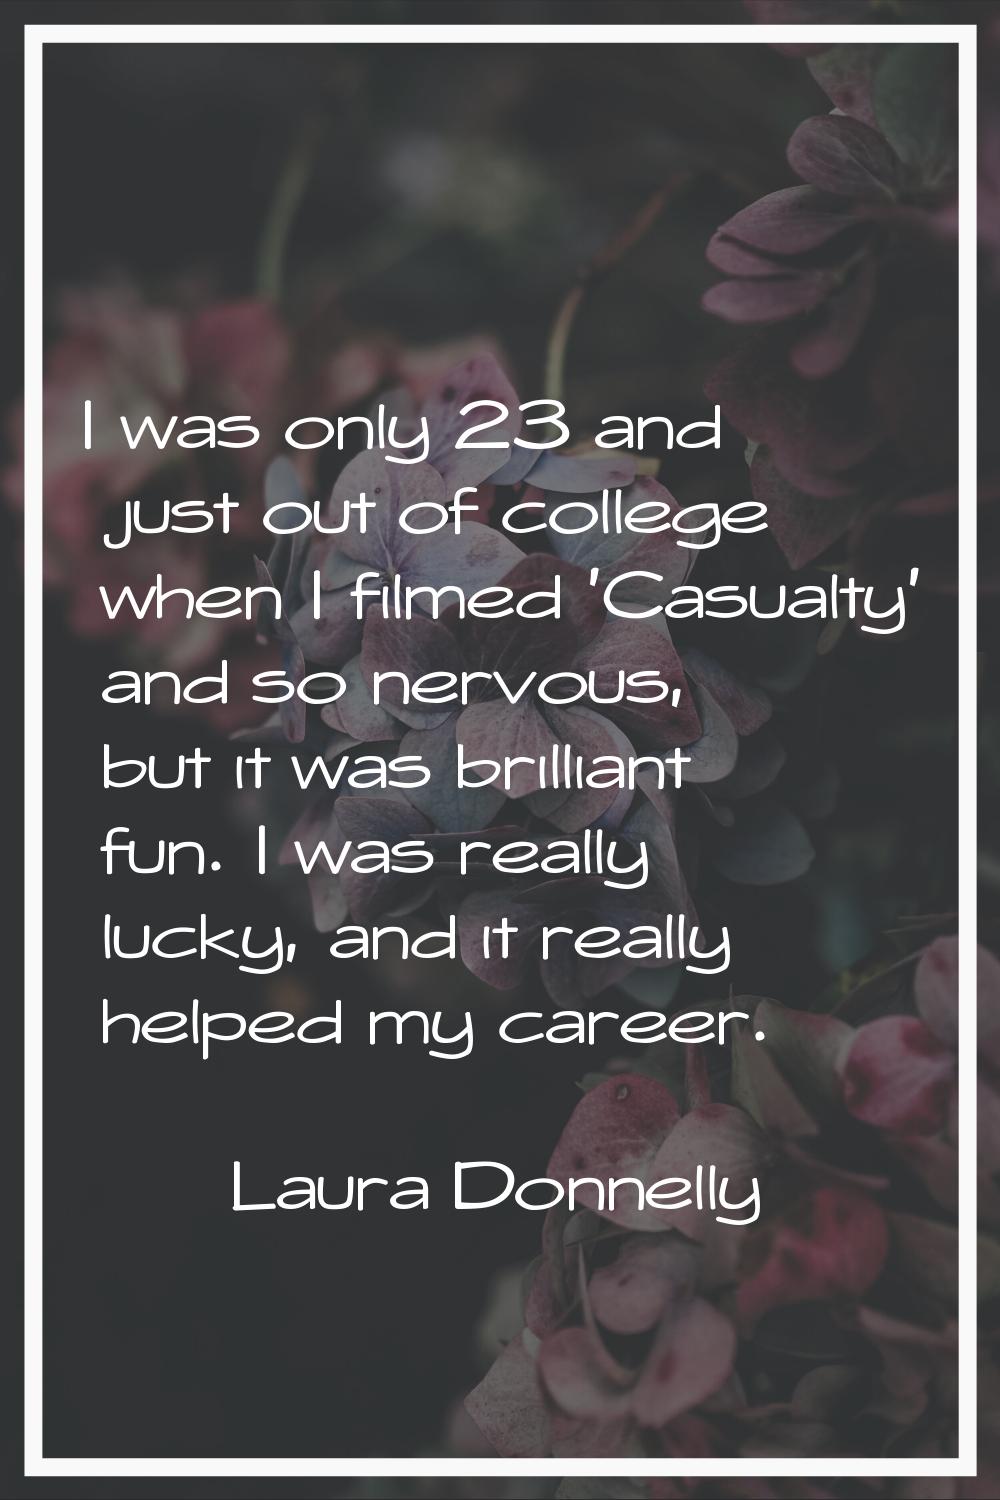 I was only 23 and just out of college when I filmed 'Casualty' and so nervous, but it was brilliant